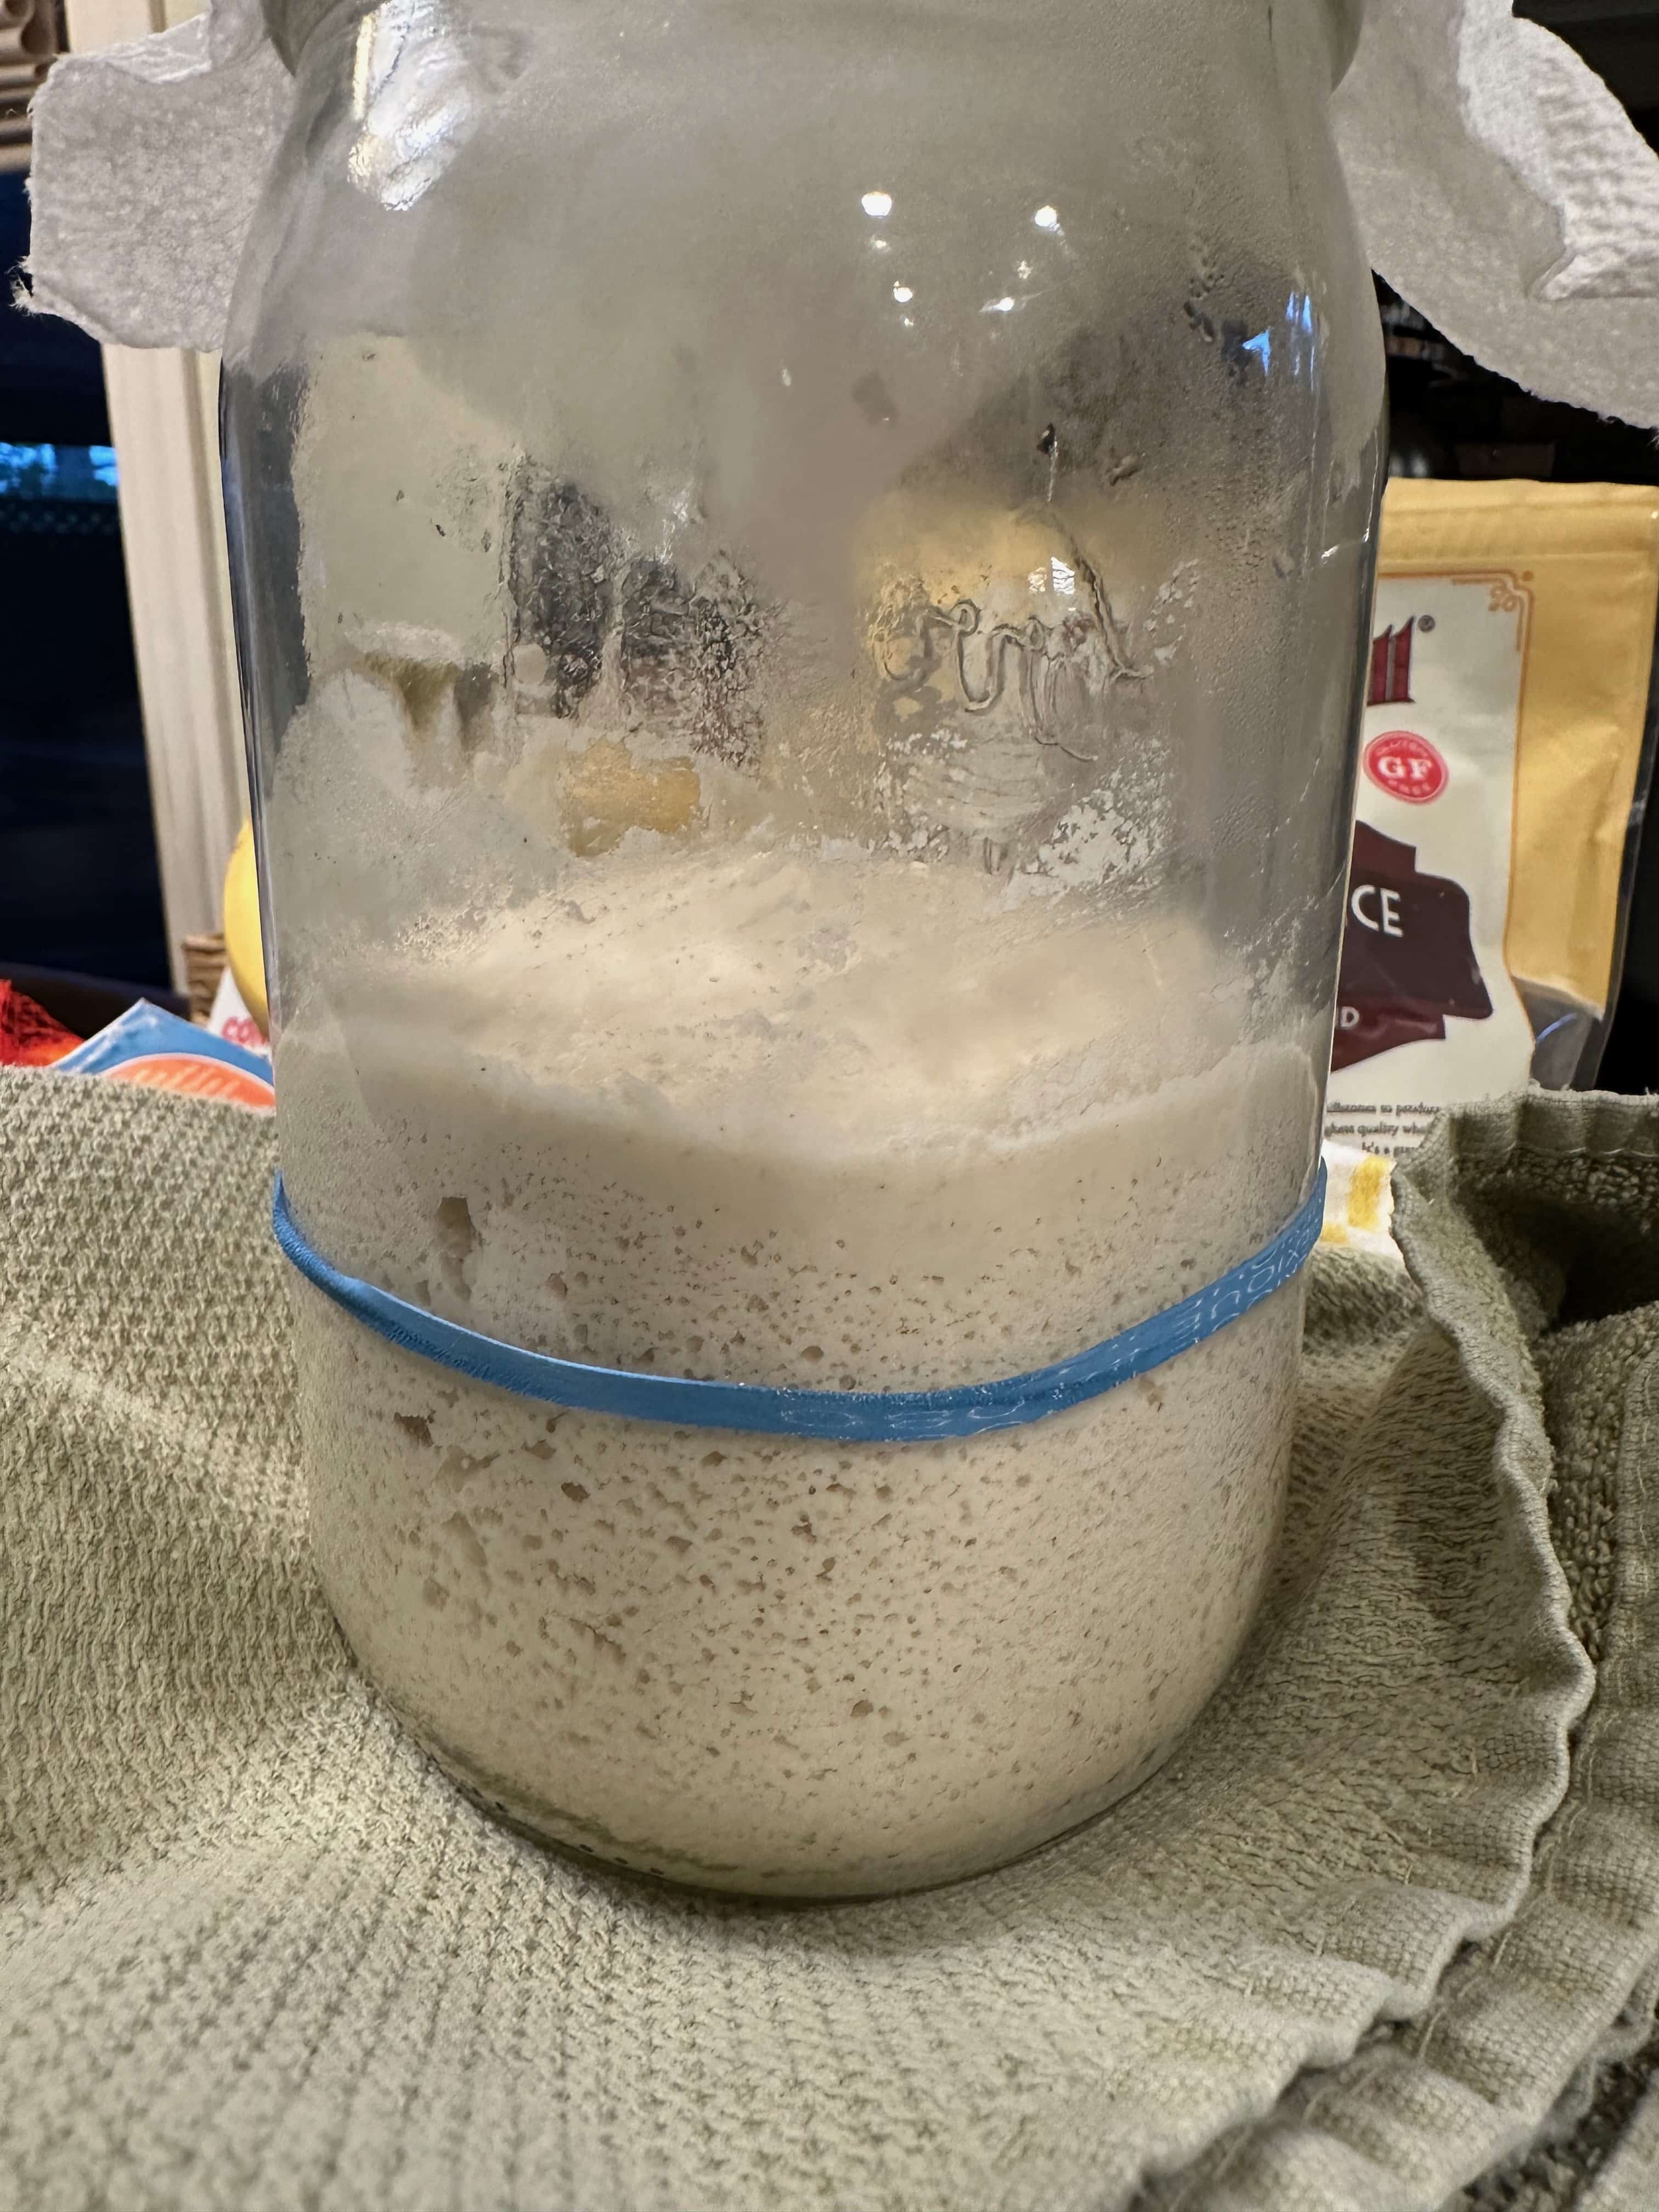 A photo of my gluten free sourdough starter in a mason jar. A blue rubber band shows the growth.